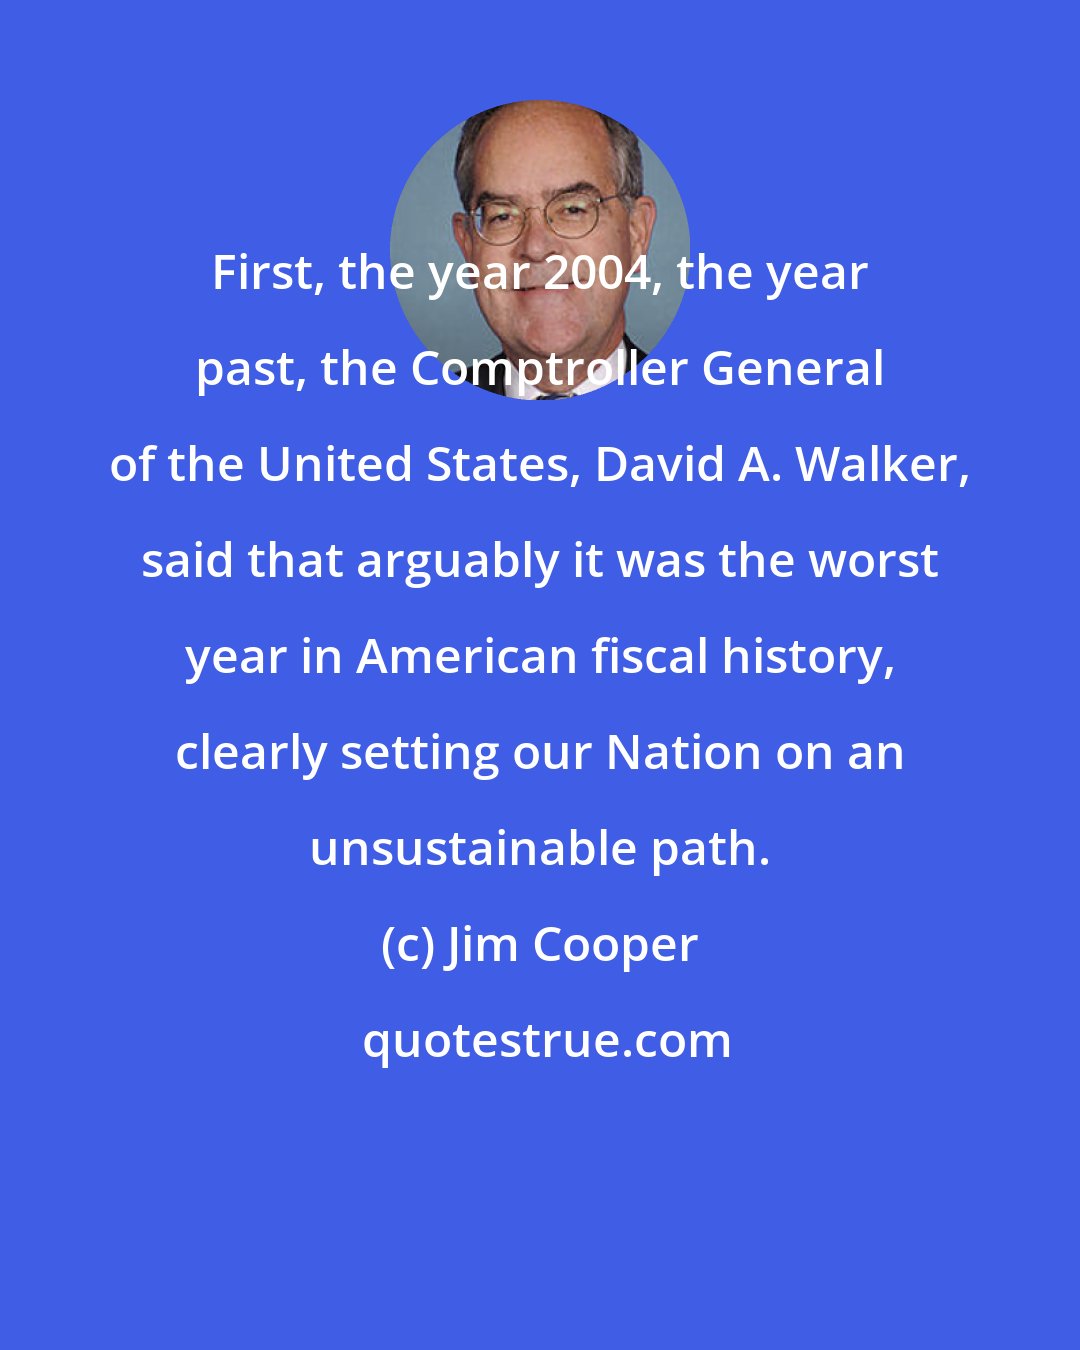 Jim Cooper: First, the year 2004, the year past, the Comptroller General of the United States, David A. Walker, said that arguably it was the worst year in American fiscal history, clearly setting our Nation on an unsustainable path.